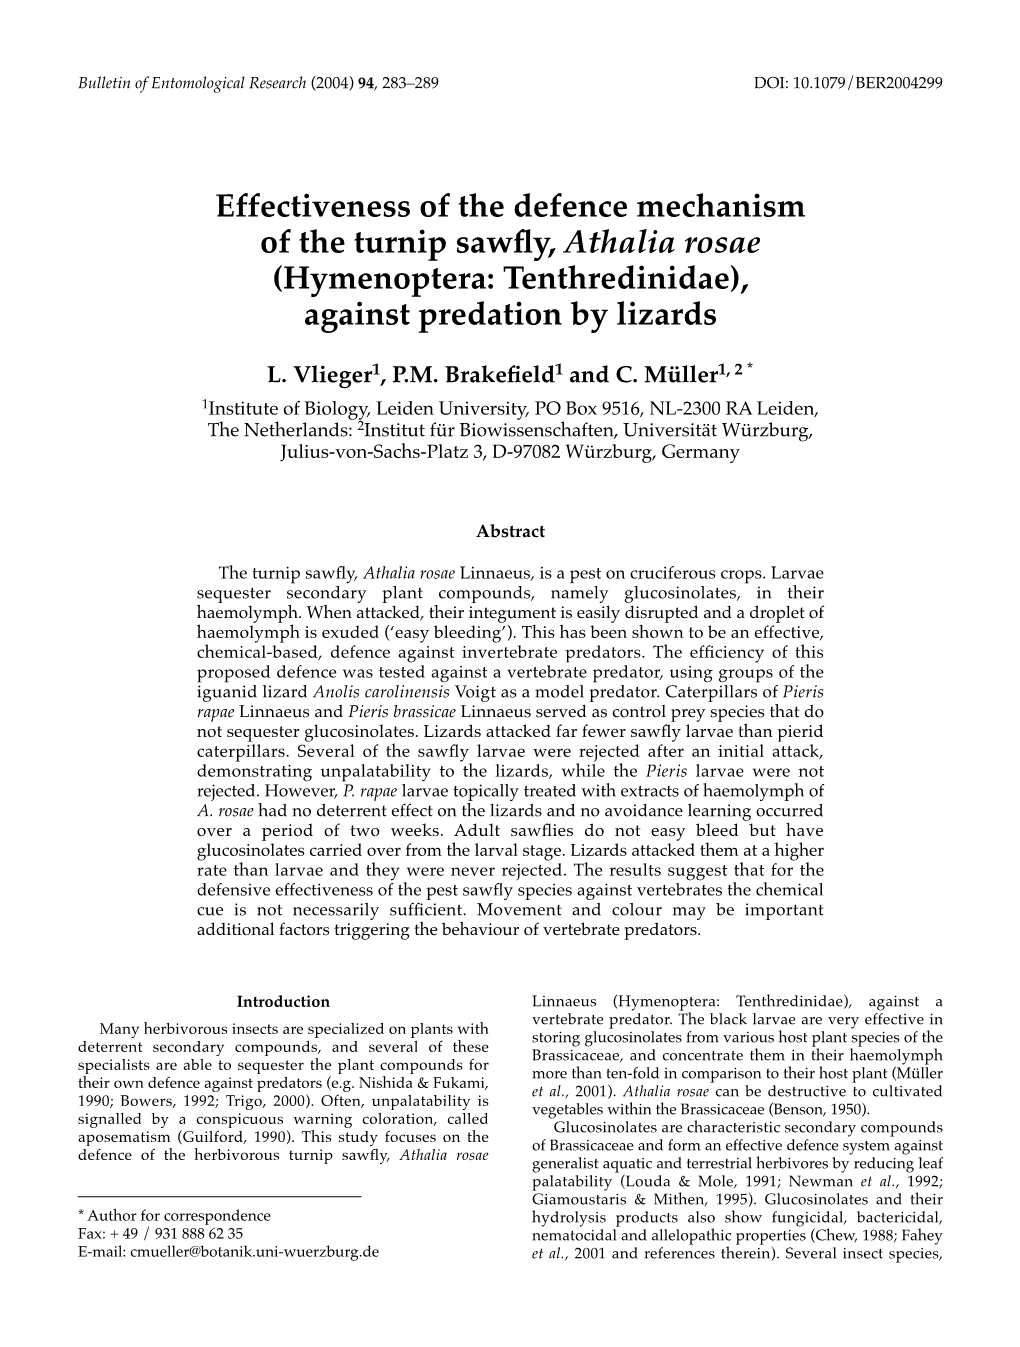 Effectiveness of the Defence Mechanism of the Turnip Sawfly, Athalia Rosae (Hymenoptera: Tenthredinidae), Against Predation by L